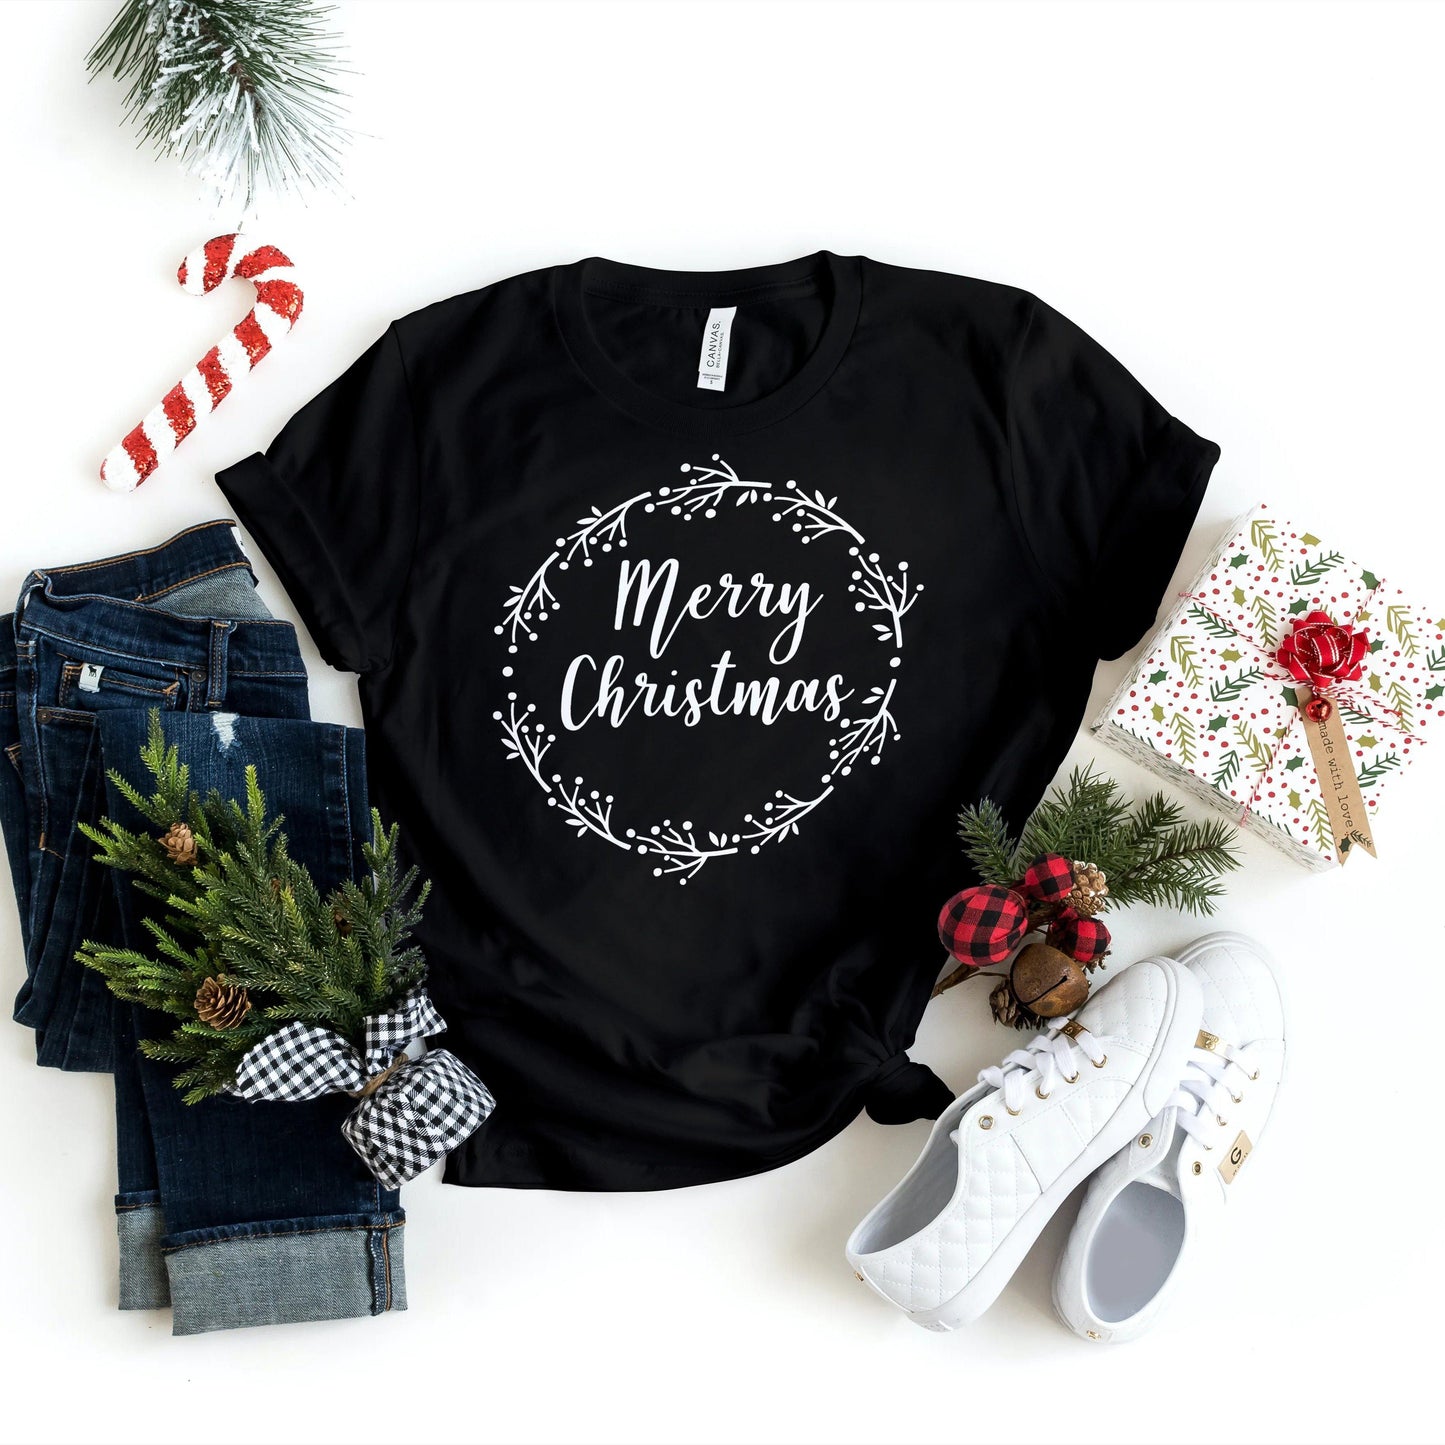 Christmas Shirts - Merry Christmas 2 - Holiday Shirts - Gifts - Healthy Wealthy Skinny